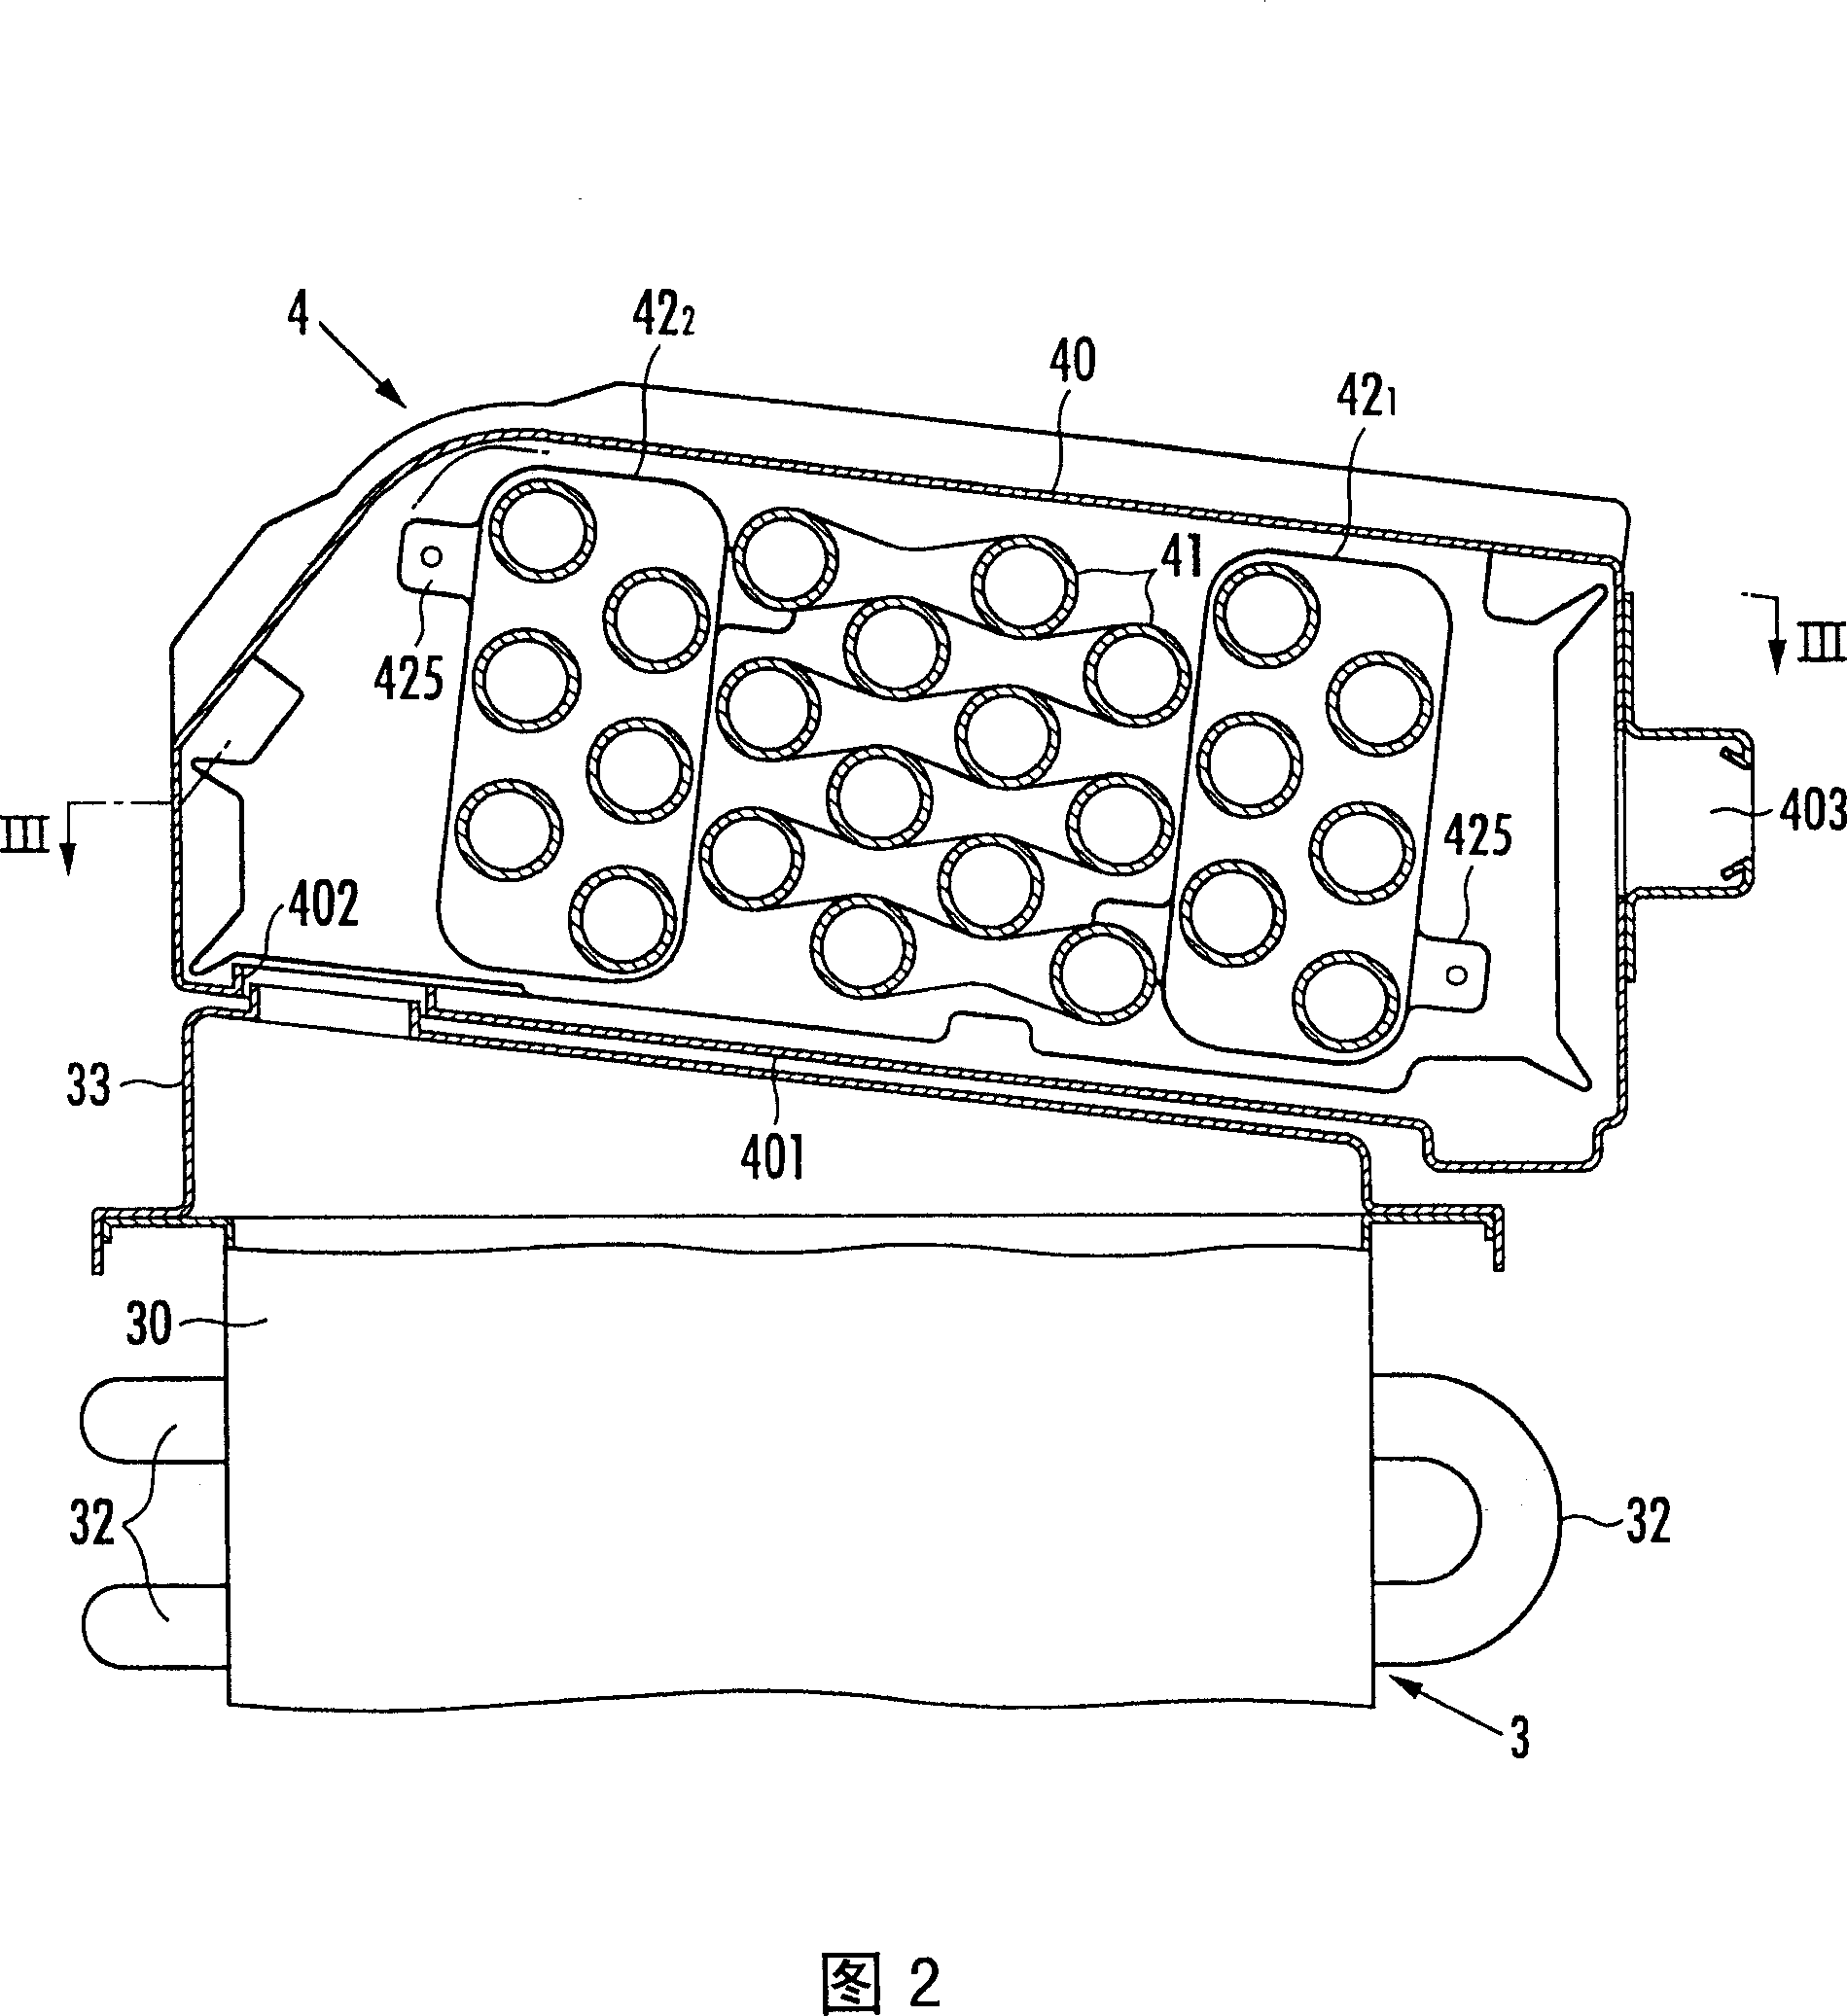 Manufacture method of a latent heat recovery type heat exchanger